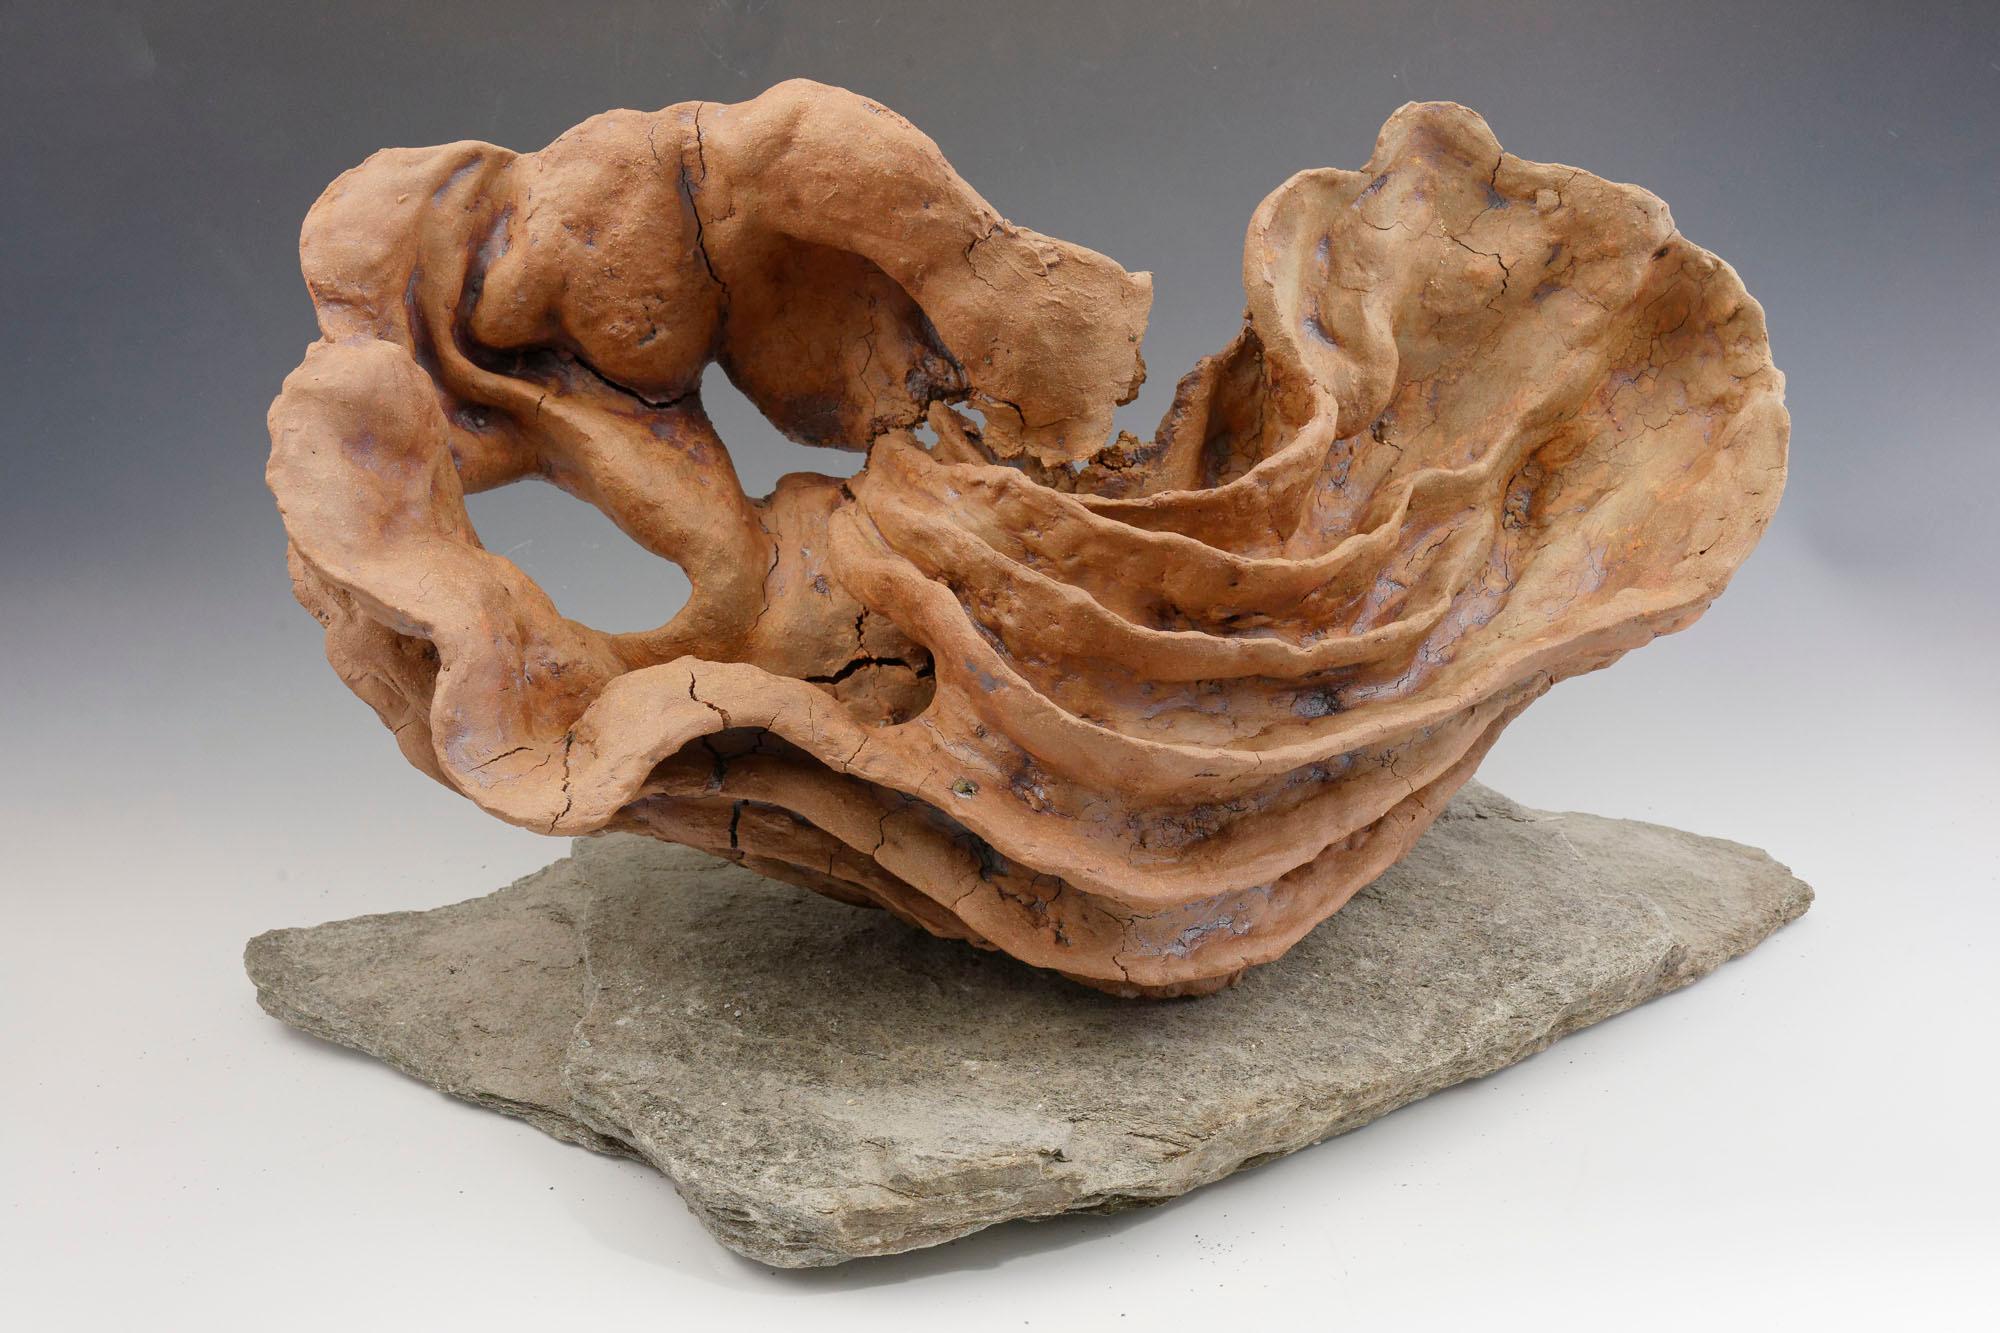 Allan Drossman Abstract Sculpture - "Wave Form 2", glazed and textured ceramic, embodies the essence of clay 